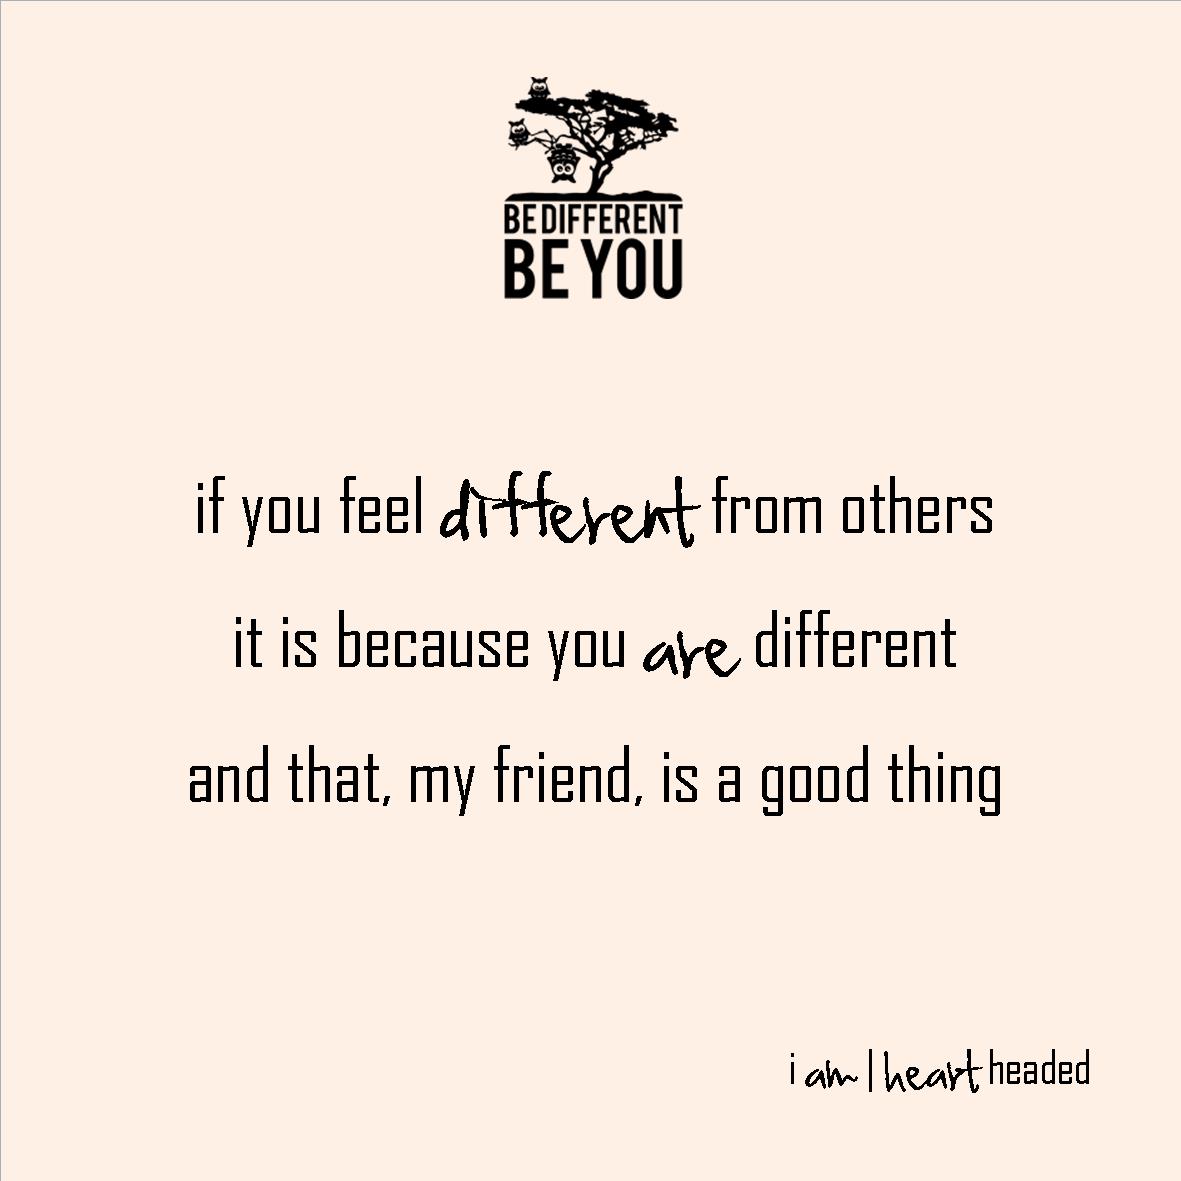 full-size featured image of quote 'if you feel different' in category 'wacky' at i am | heart headed